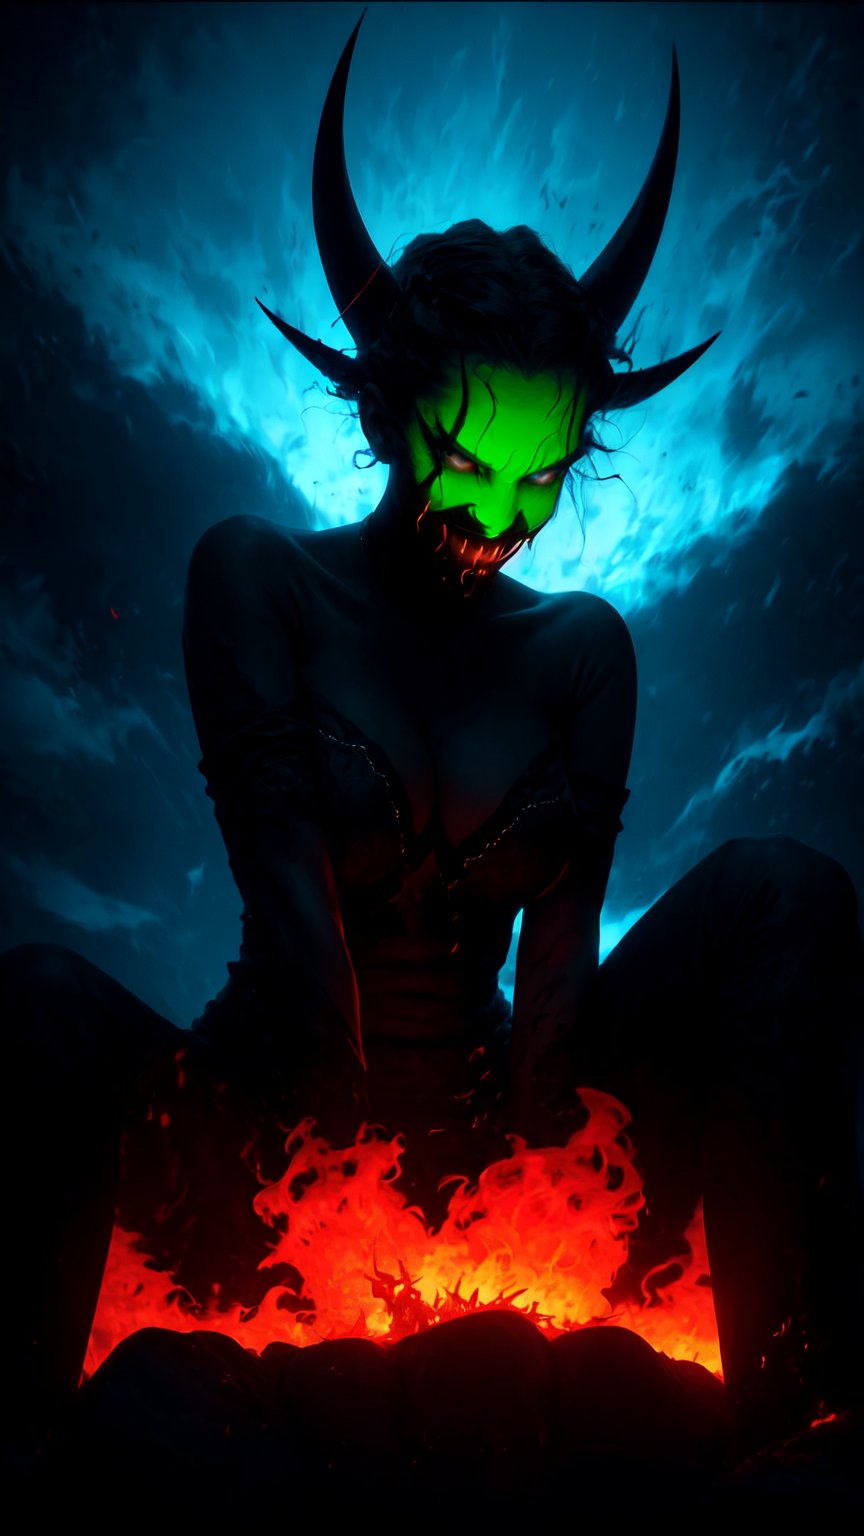 In a dimly lit, darkened room, an exquisite woman sits majestically in high definition, her features ultra-detailed and rendered in stunning high resolution. Her eyes, like empty vessels, gaze directly at the viewer with a subtle hint of mischief through a little smile. The black sclera adds depth to her mysterious expression. Against the backdrop of swirling CLOUDS, RED FIRE, GREEN FIRE, BLUE FIRE, and PURPLE FLAME dance in the air, as if summoned by her epic presence. This masterpiece is a testament to Epicrealism's mastery of the surreal and fantastical.